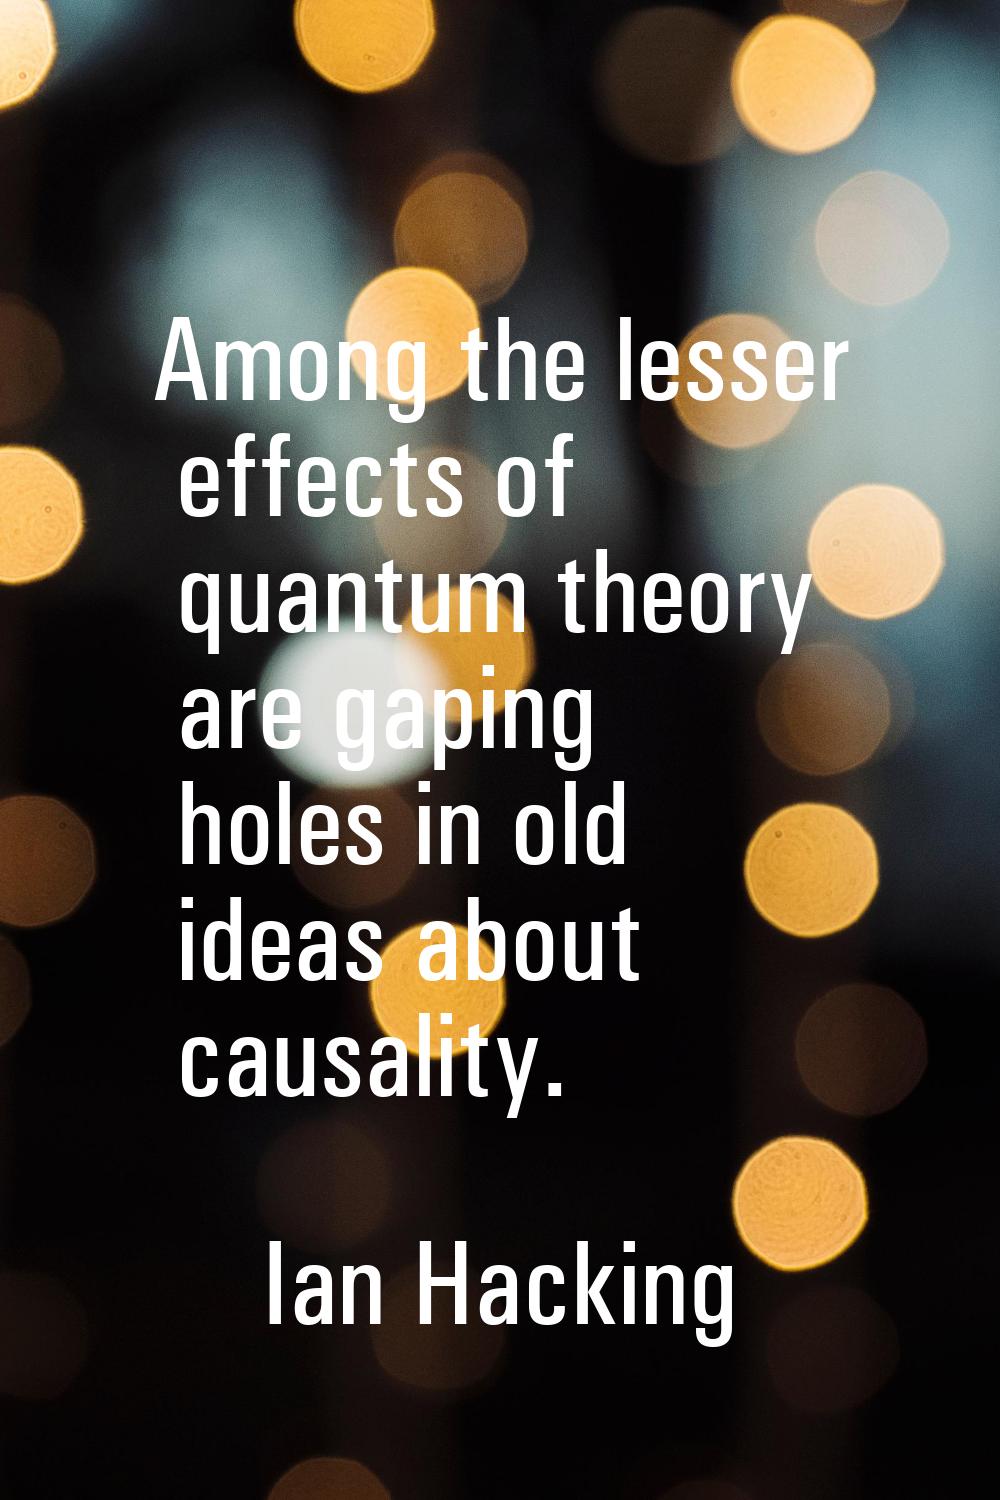 Among the lesser effects of quantum theory are gaping holes in old ideas about causality.